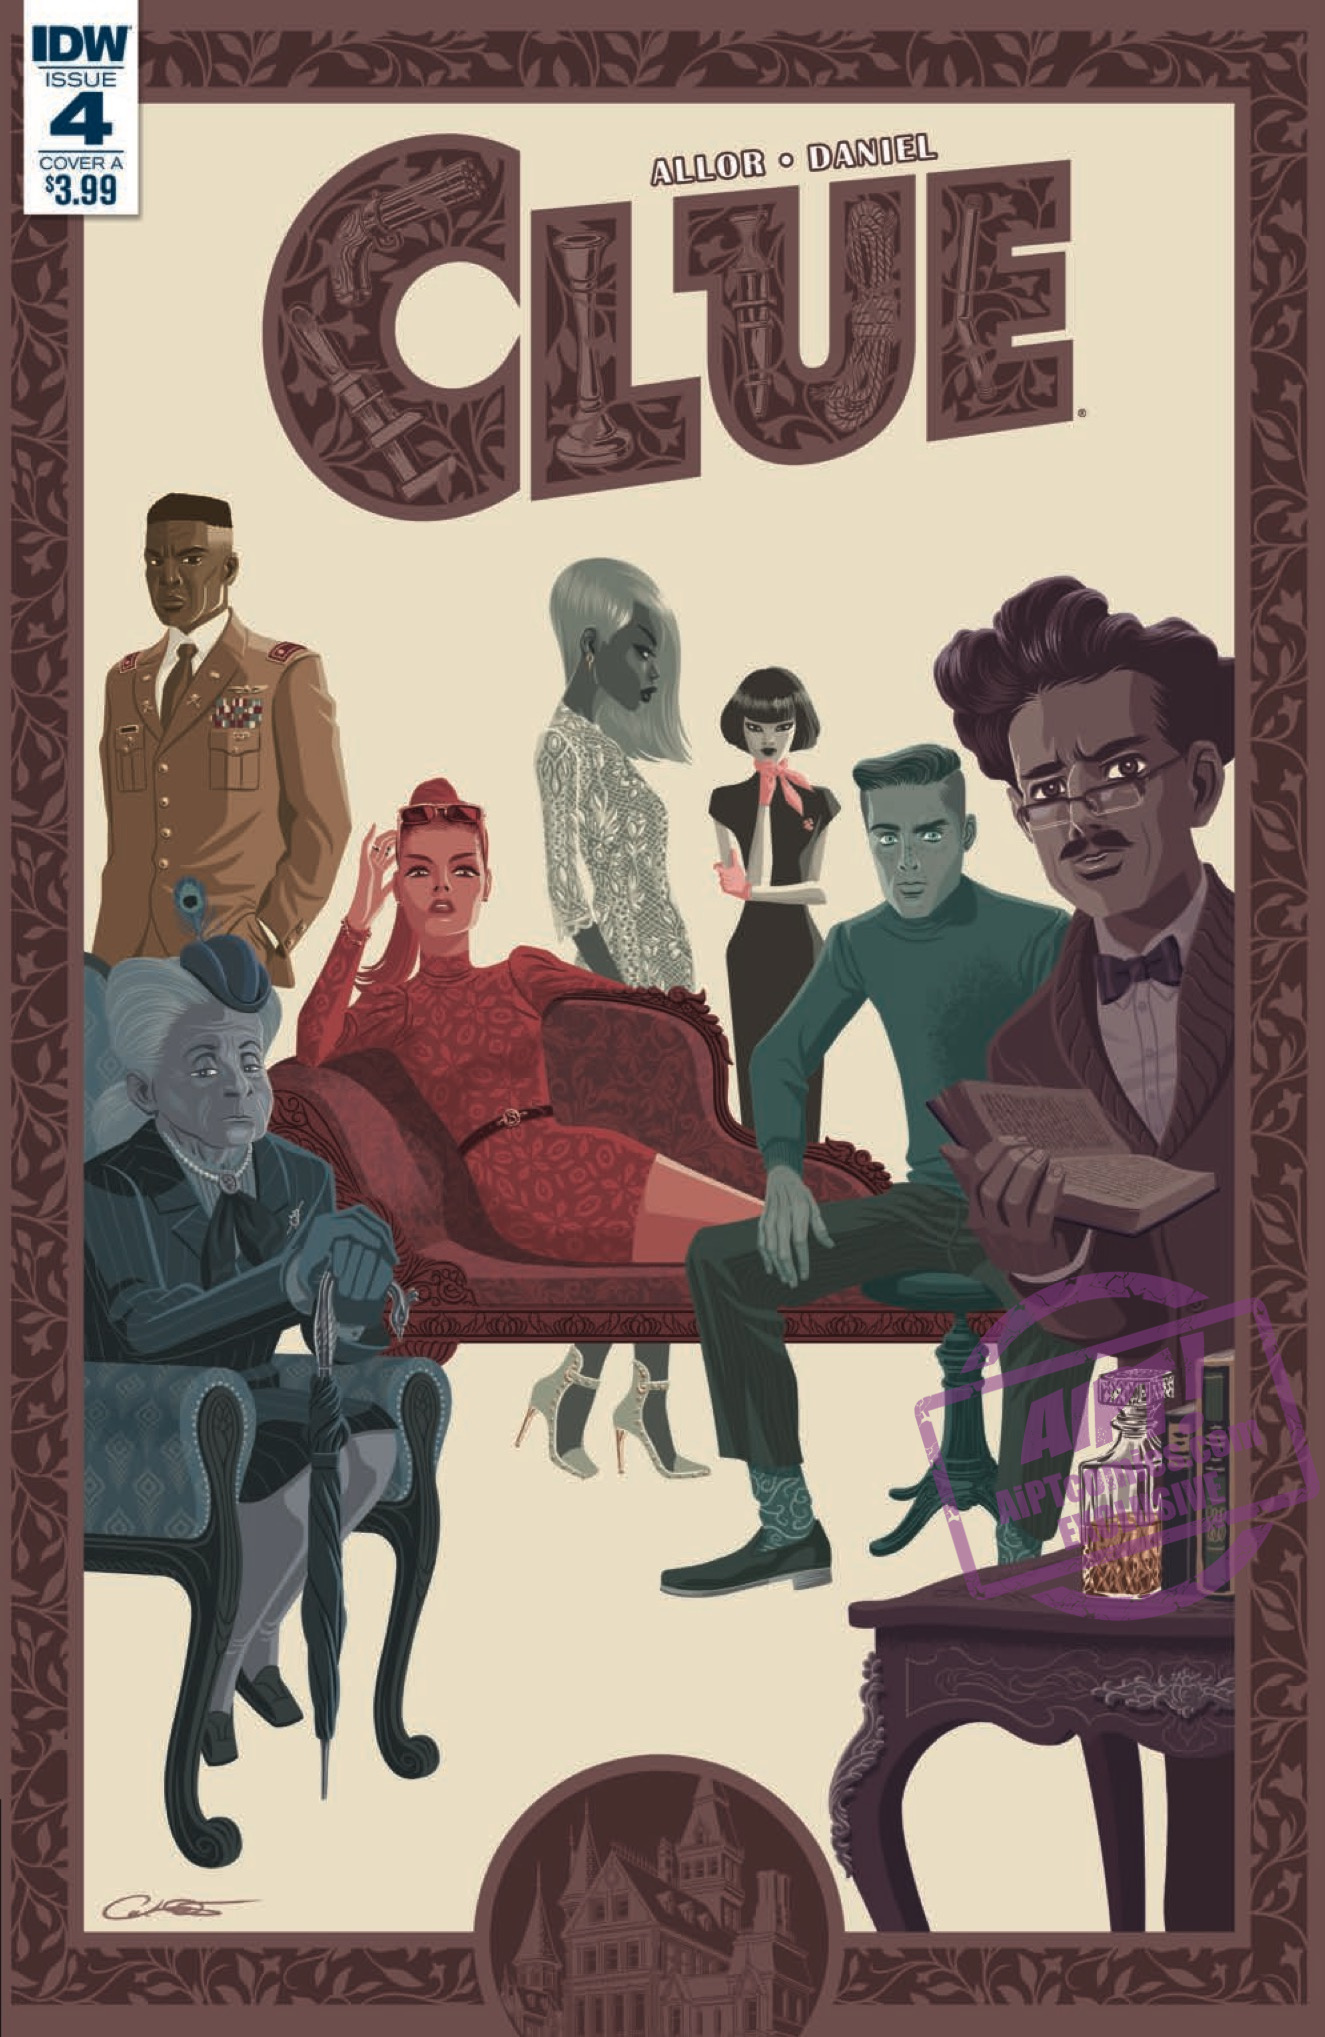 [EXCLUSIVE] IDW Preview: Clue #4